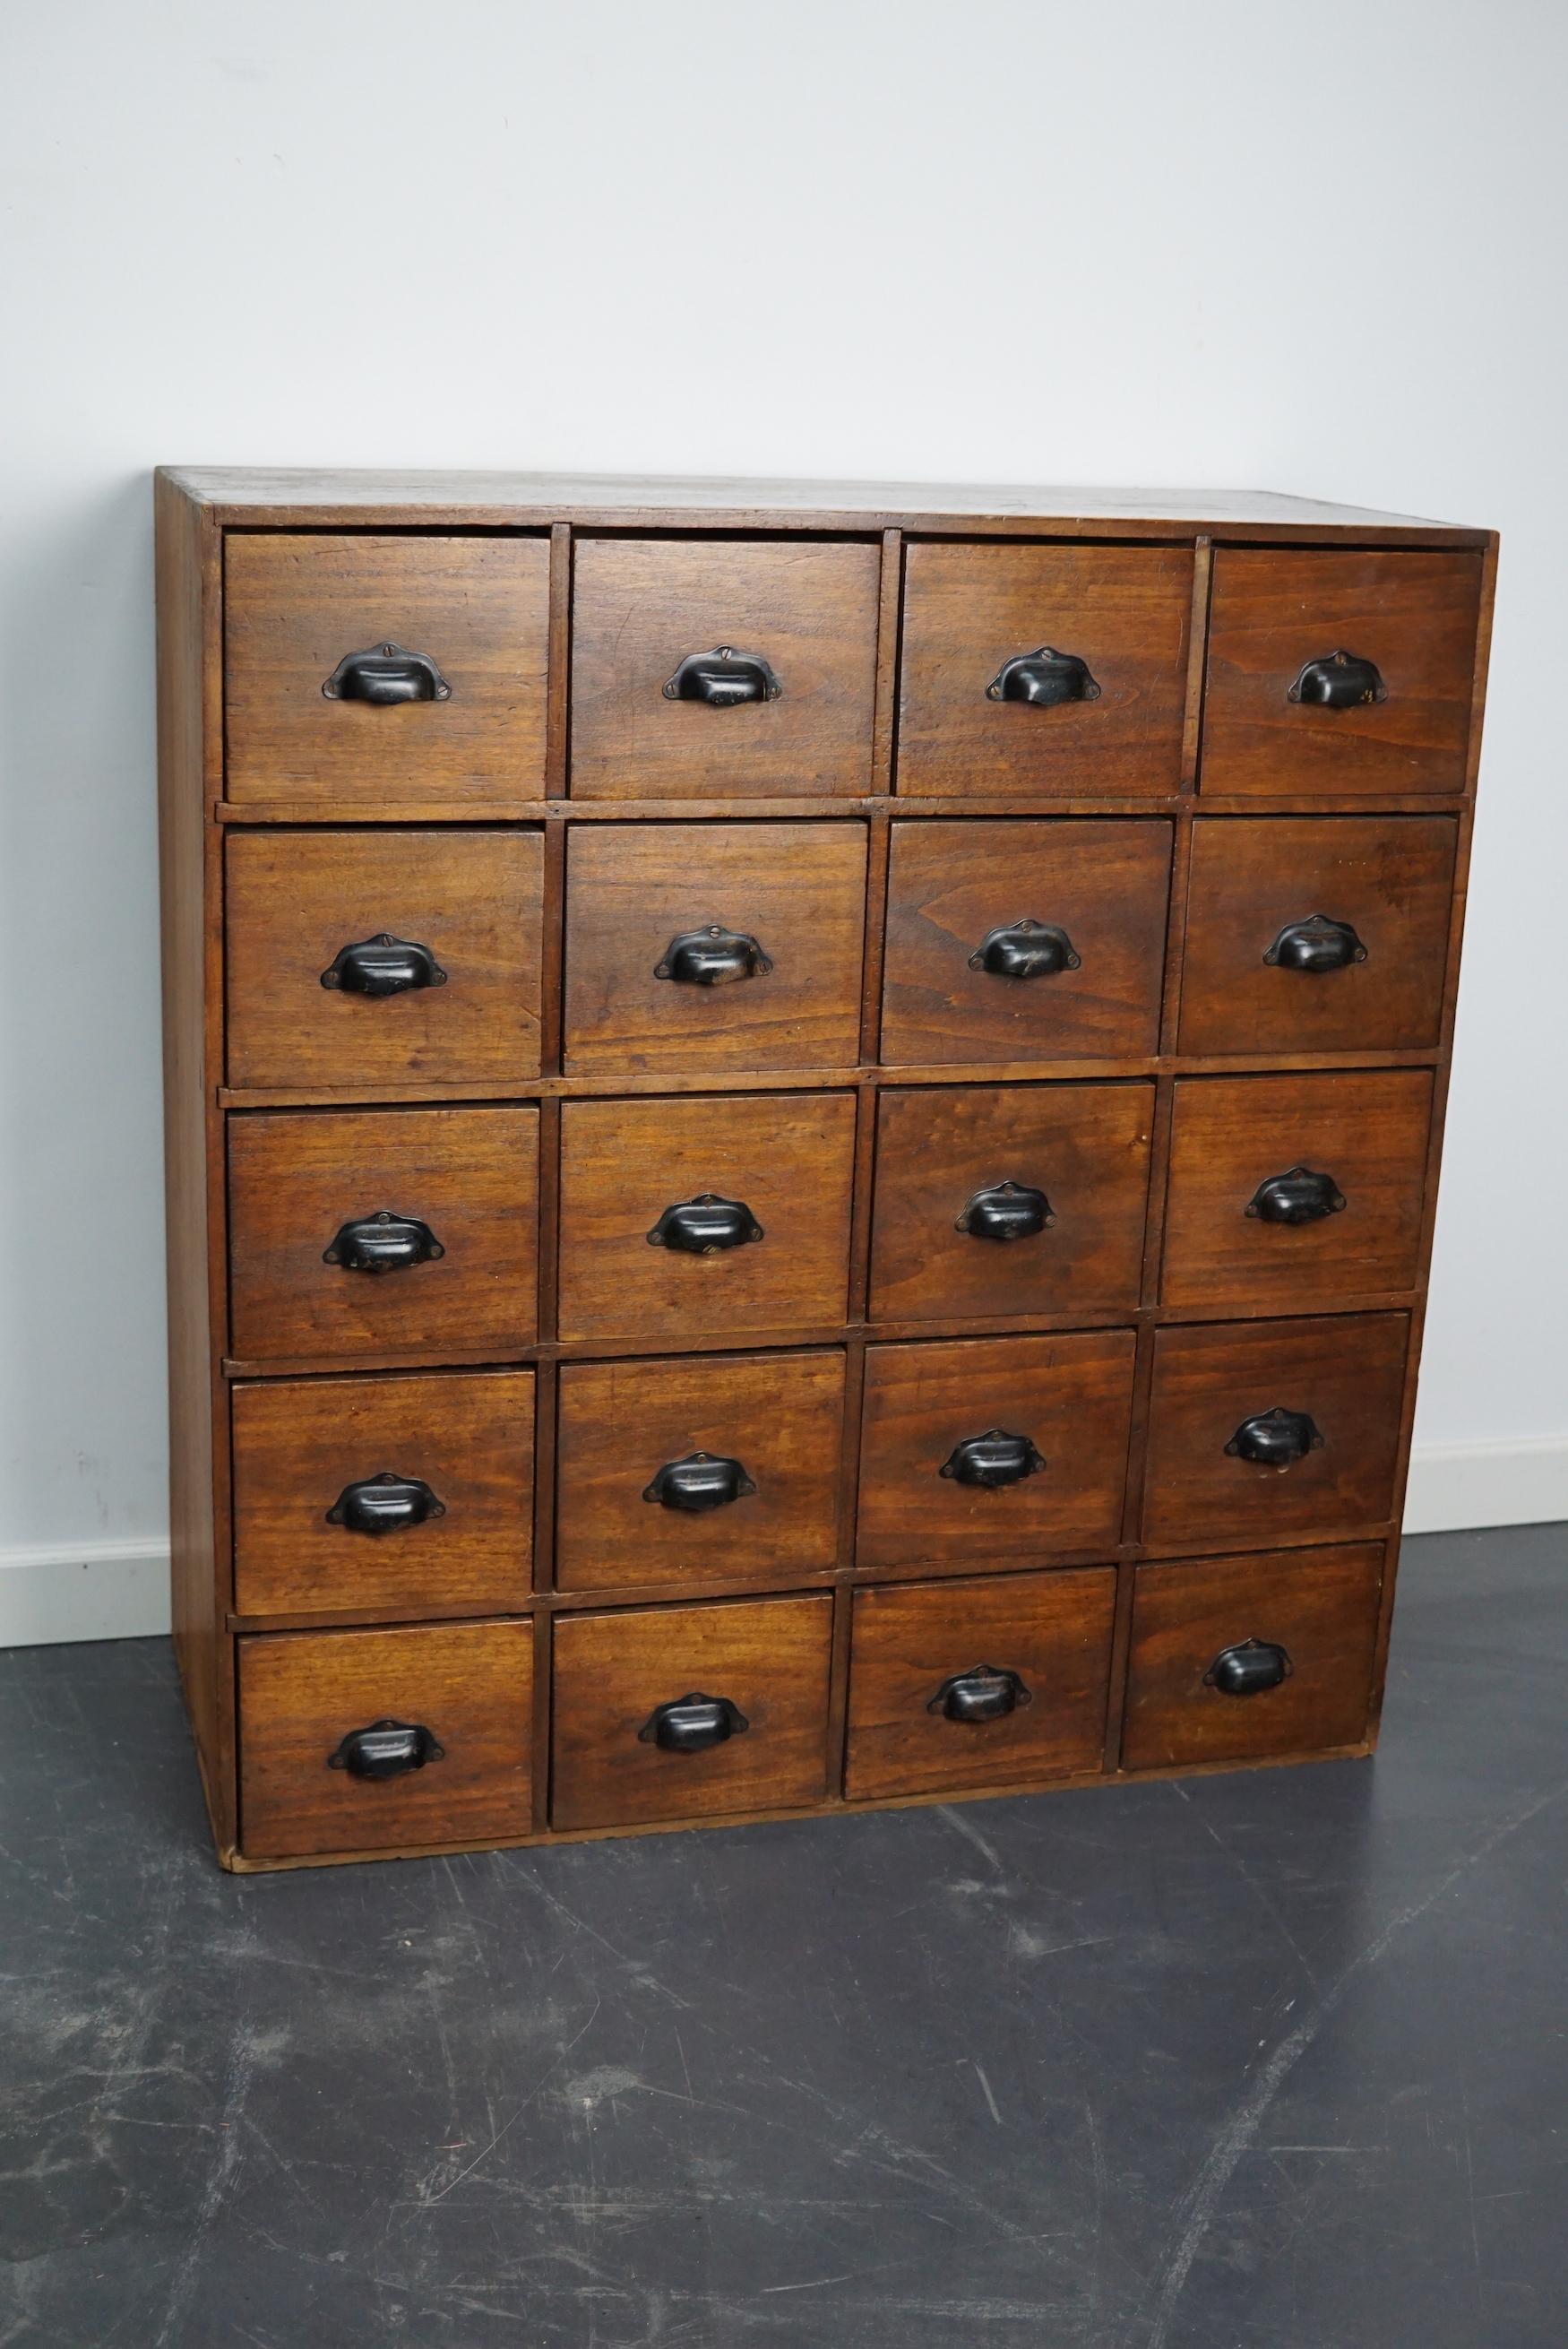 This fruitwood cabinet was made in France mid 20th century and used in a workshop. It features 20 drawers with black sheet metal handles. The interior dimensions of the drawers are: D 31 x W 15 x H 13 cm.